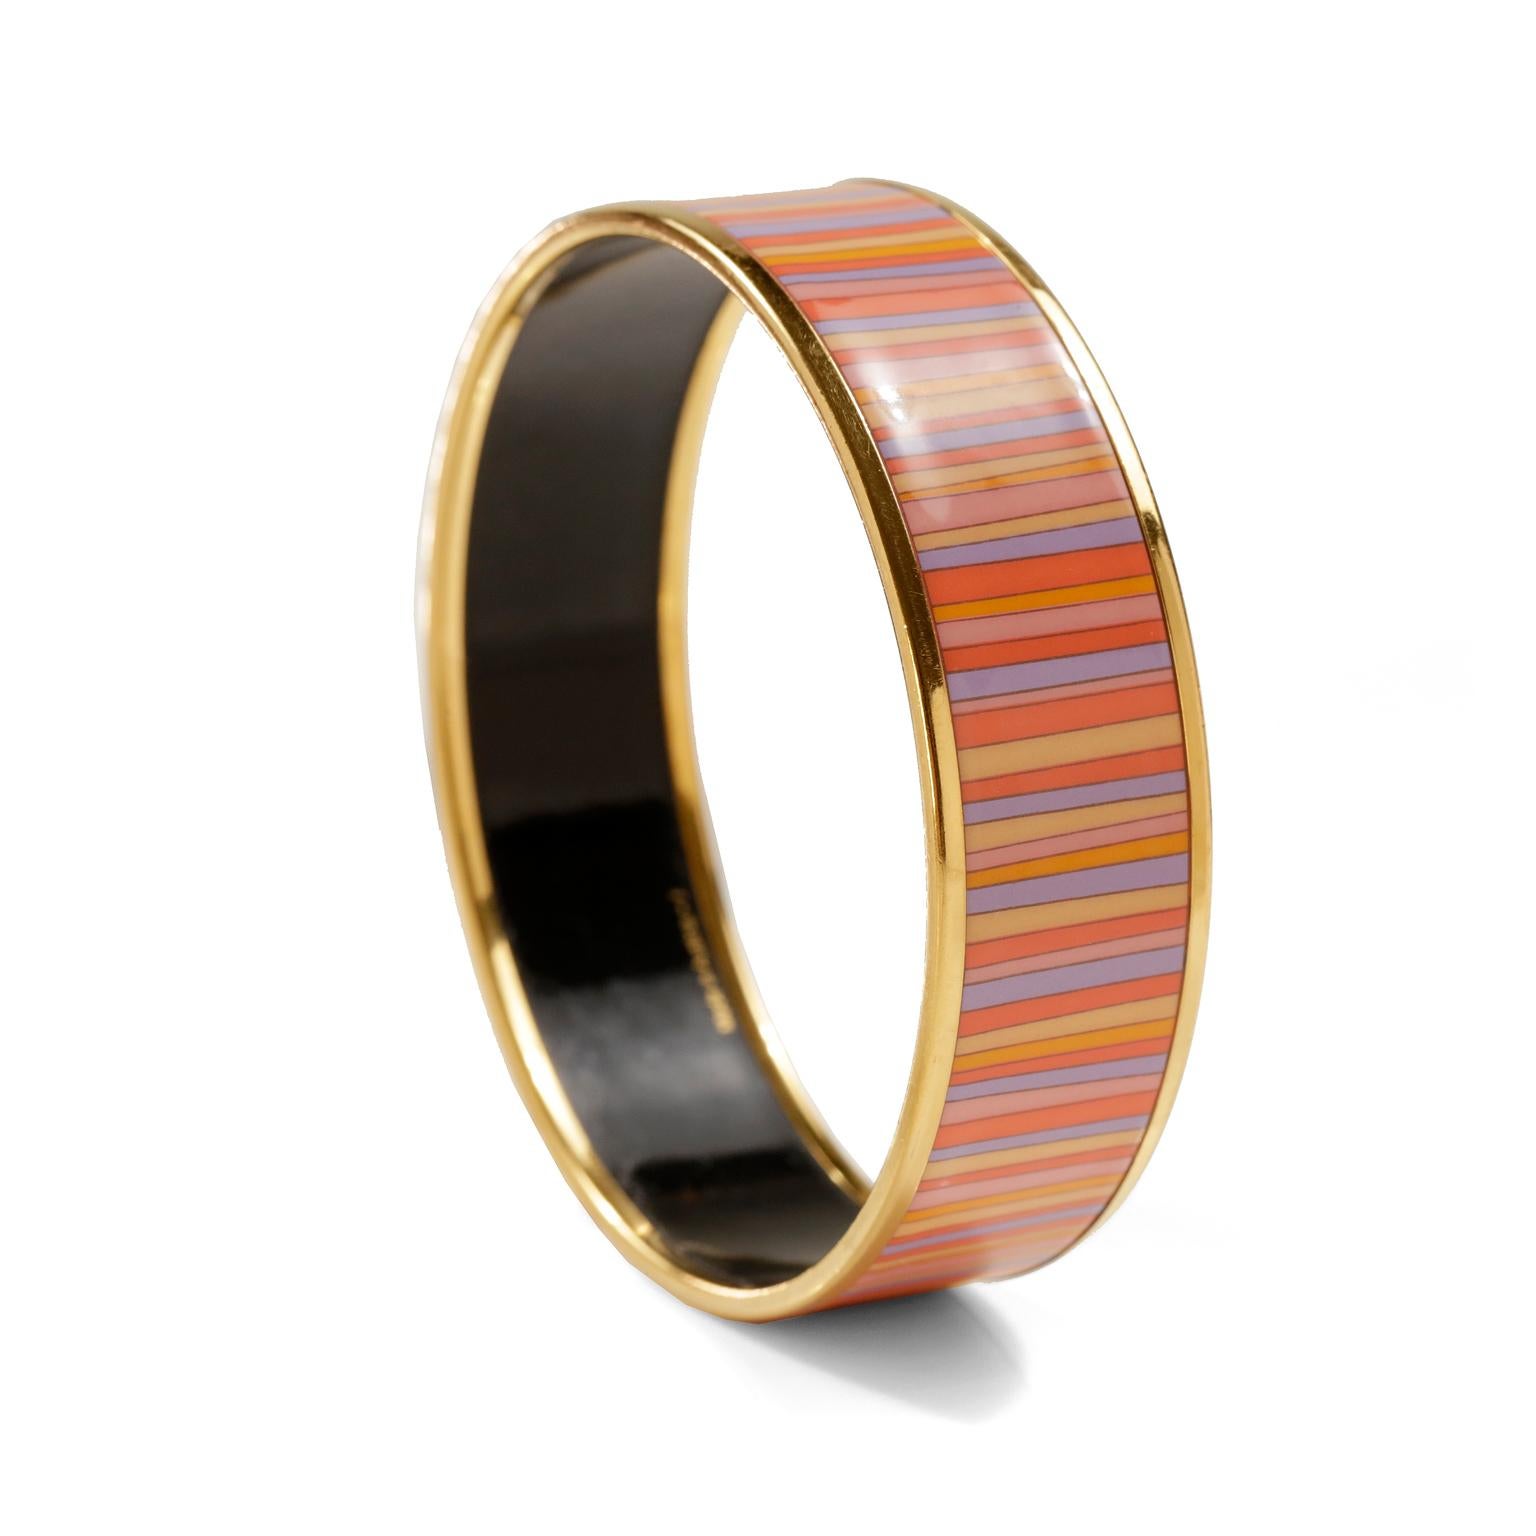 This authentic Hermès Striped Enamel Bracelet is in very good condition.  Gold tone edges, multicolored thin striped pattern in shades of orange, lavender, pink and yellow.  Made in Austria, F stamp.
